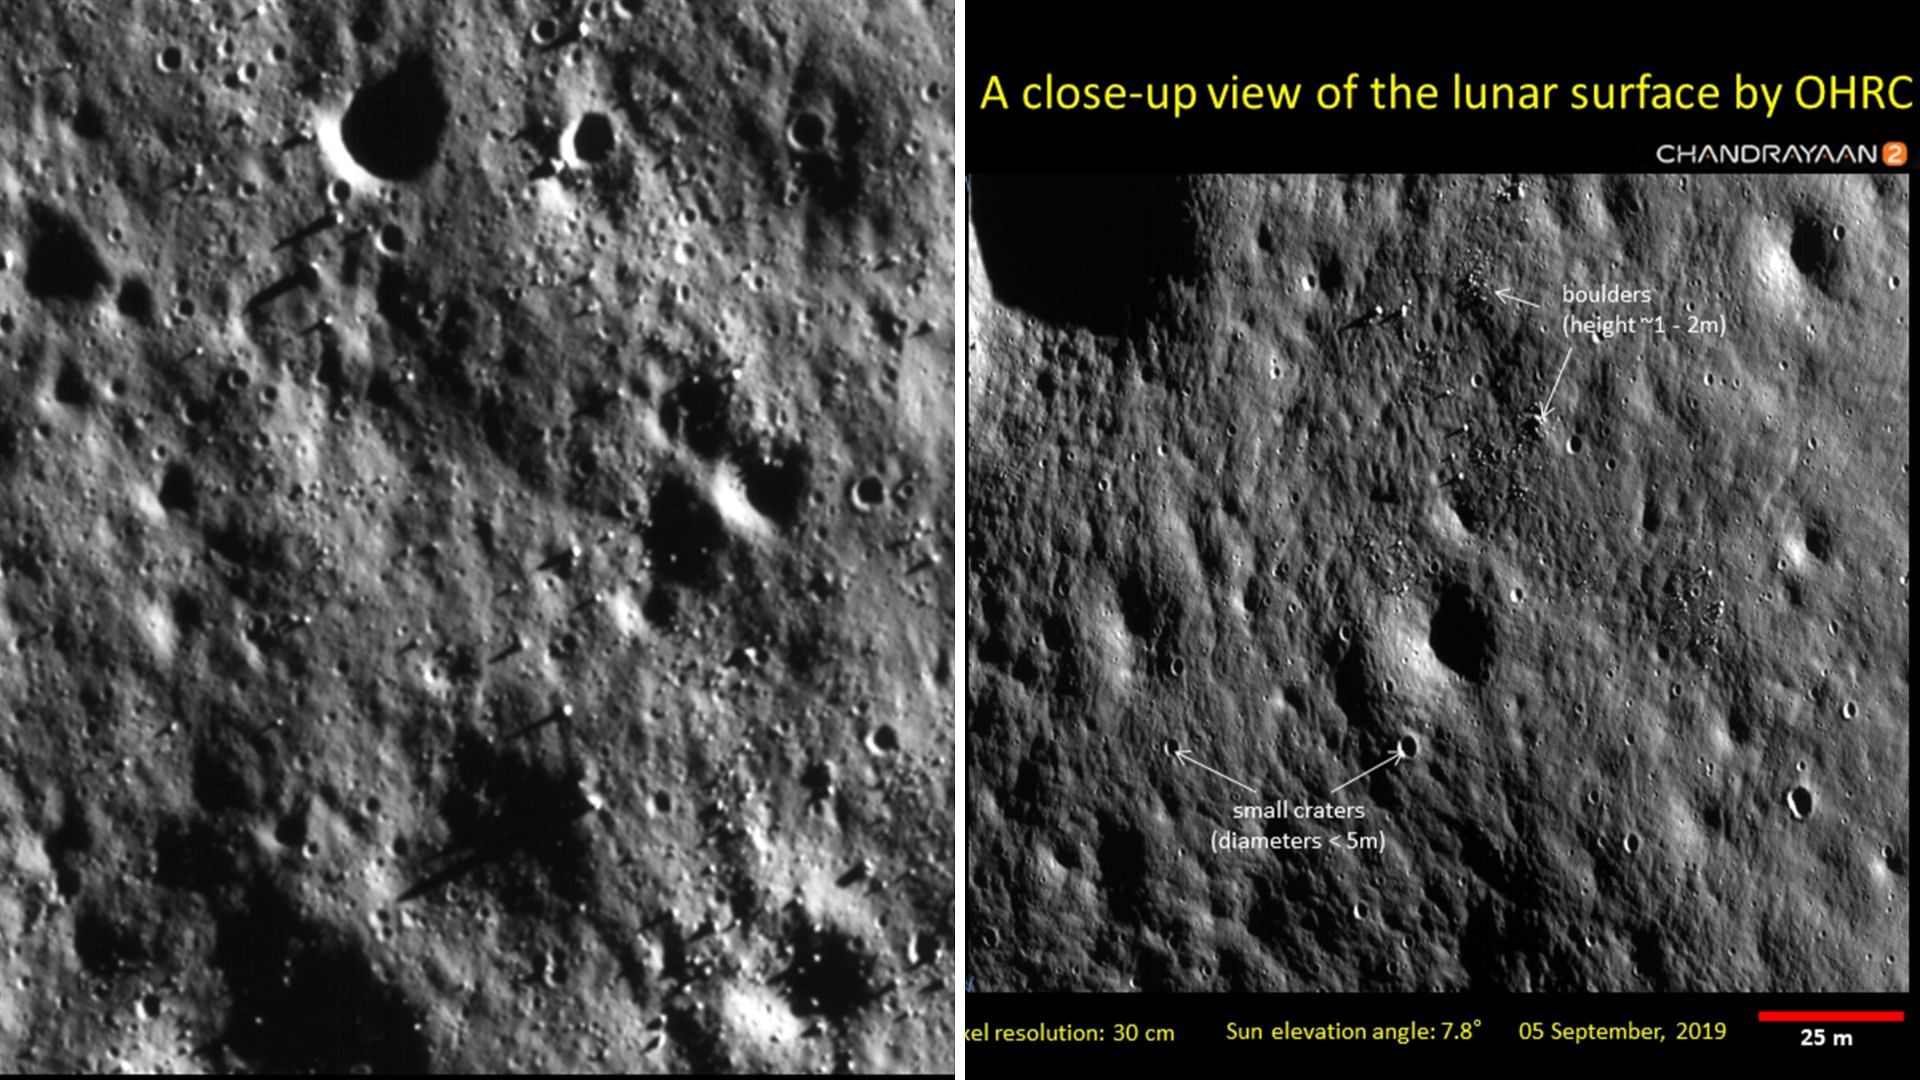 ISRO on Friday, 4 October released new images of the Moon’s surface captured by Chandrayaan-2’s OHRC.